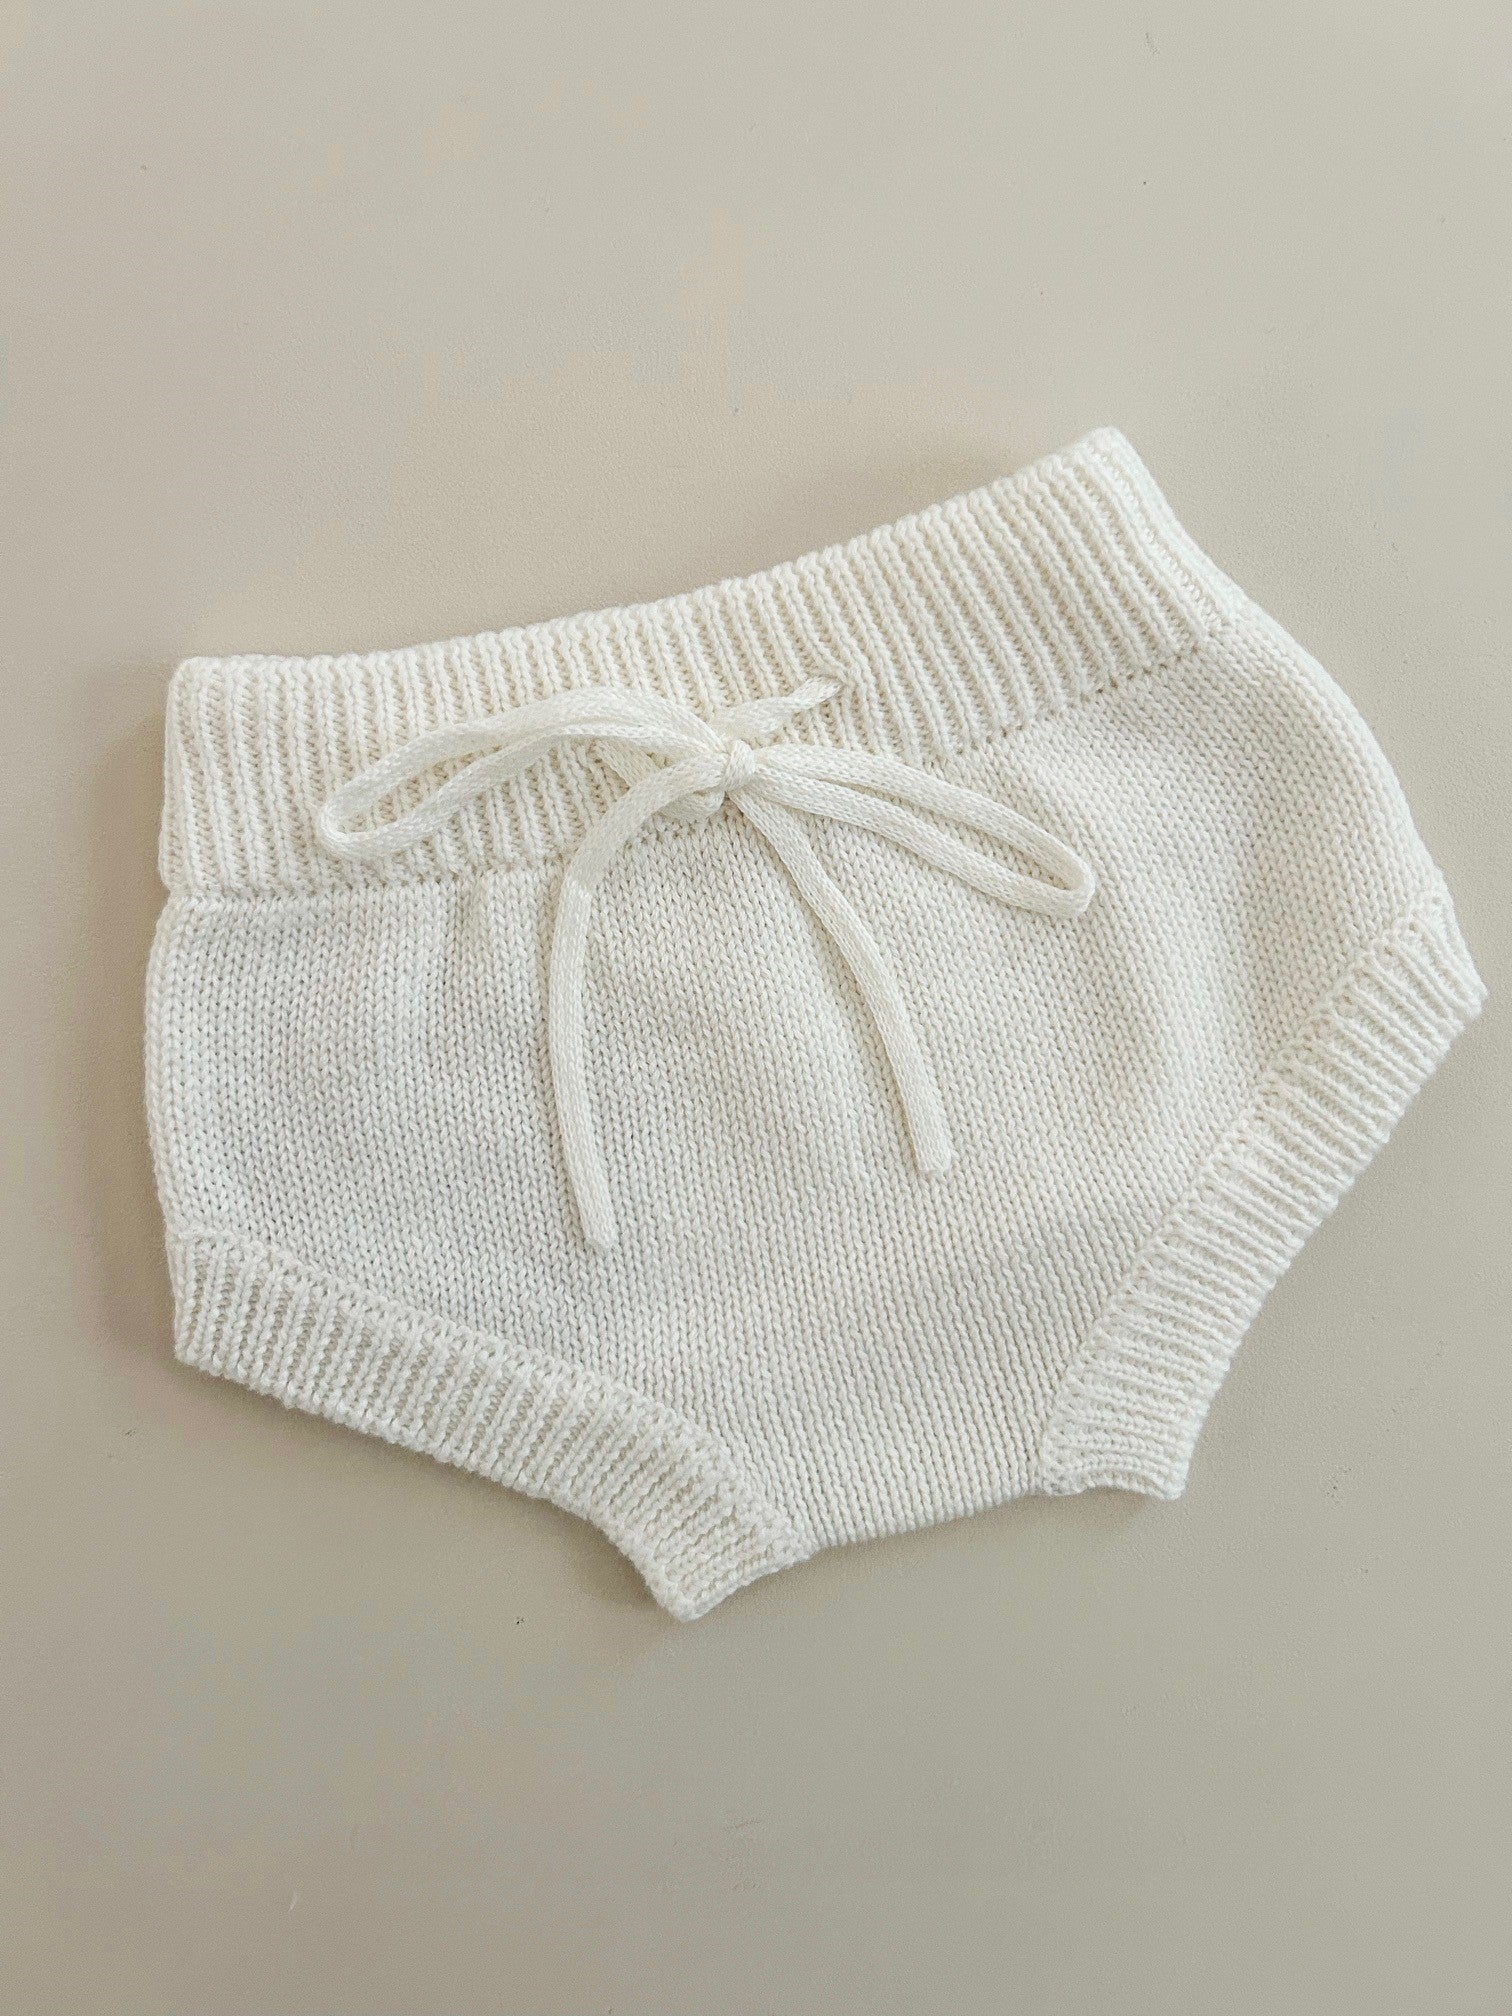 KNIT BLOOMERS - WHITE